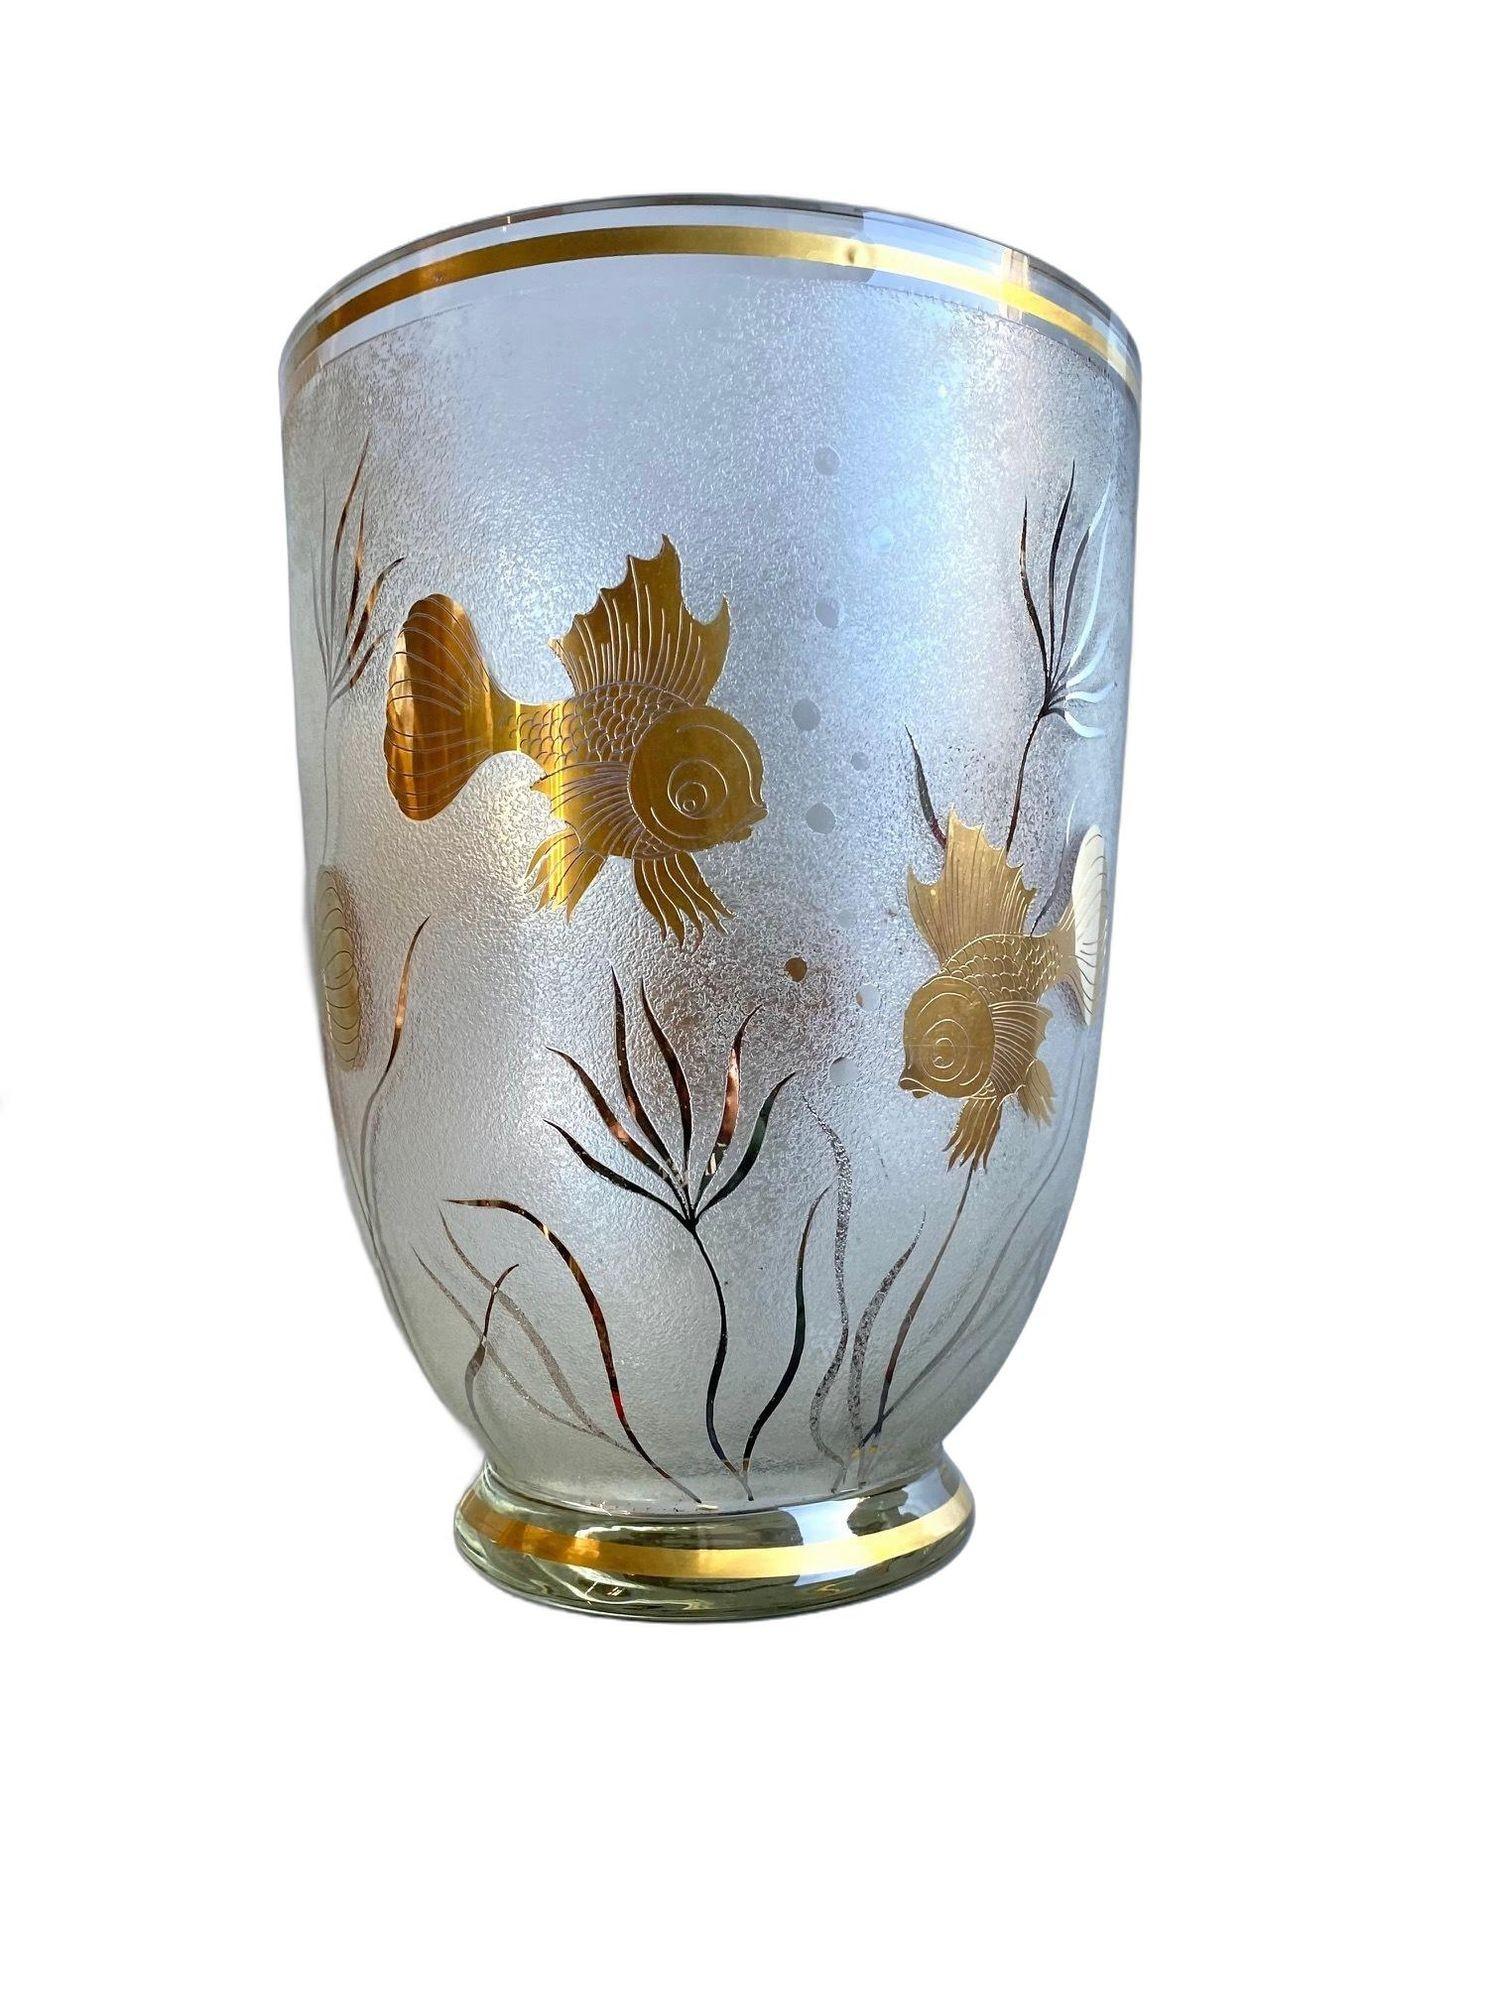 Monumental Etched Glass Vase with Gold Fish Overlay In Excellent Condition For Sale In Van Nuys, CA